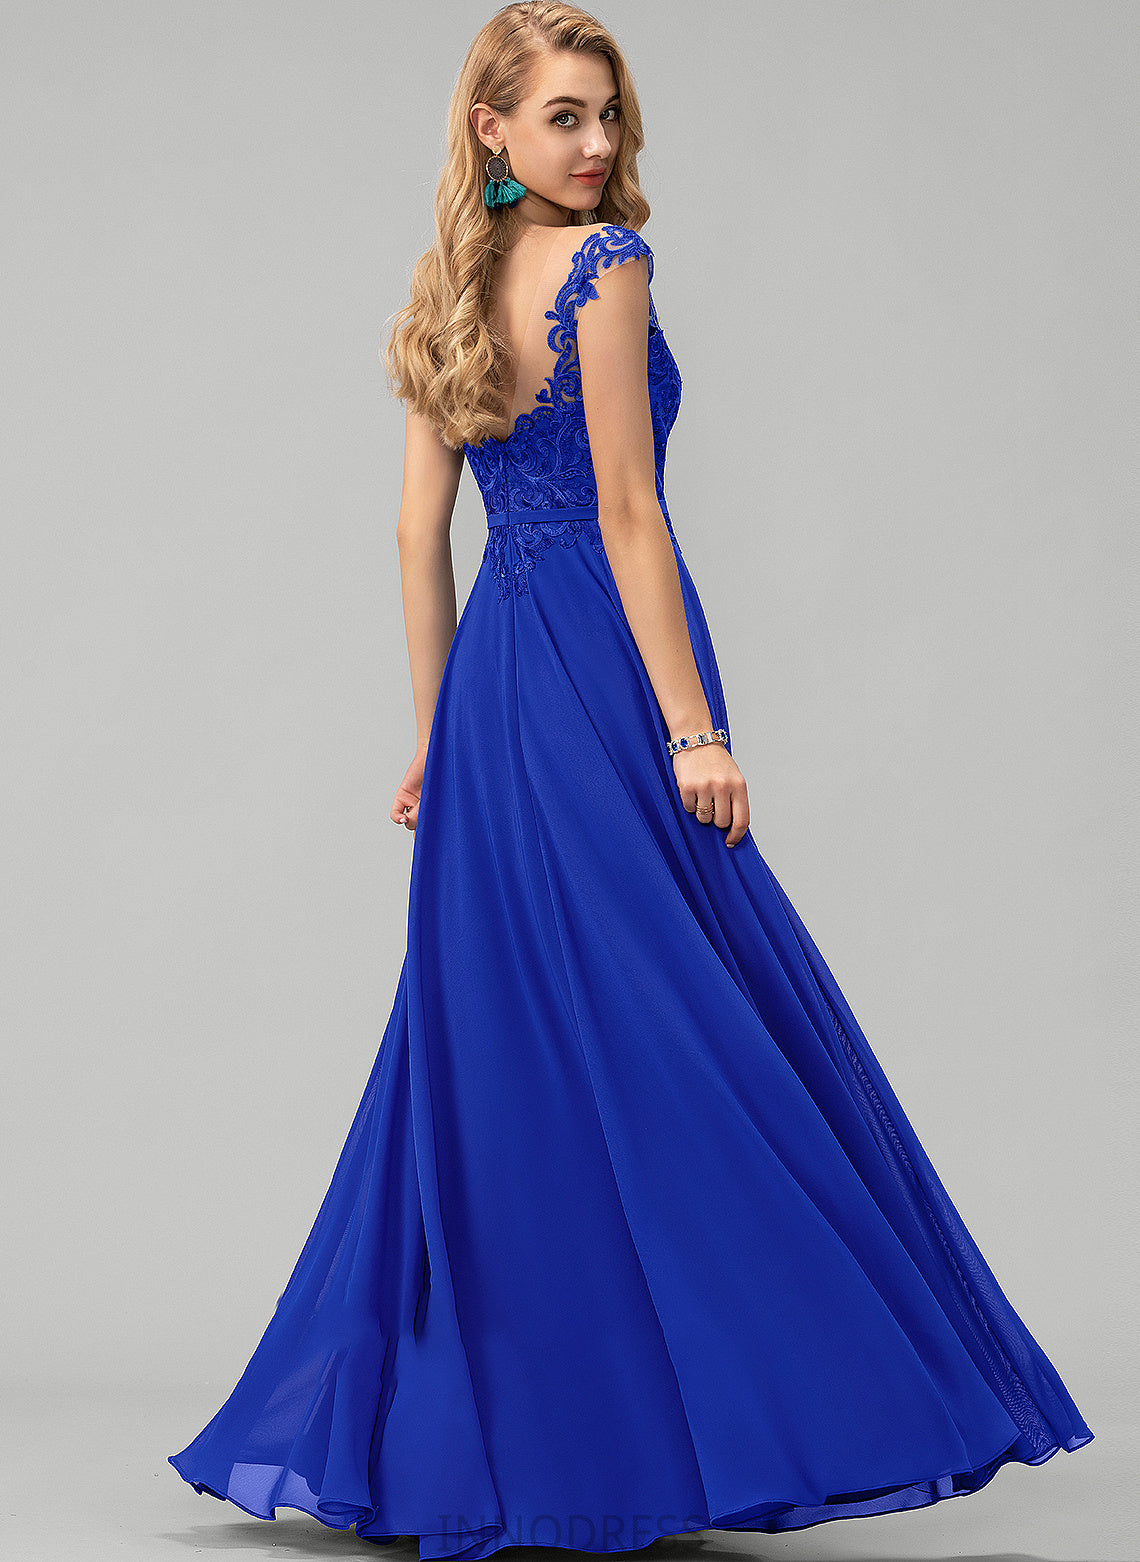 Neck Lace Chiffon With Marianna A-Line Floor-Length Scoop Sequins Prom Dresses